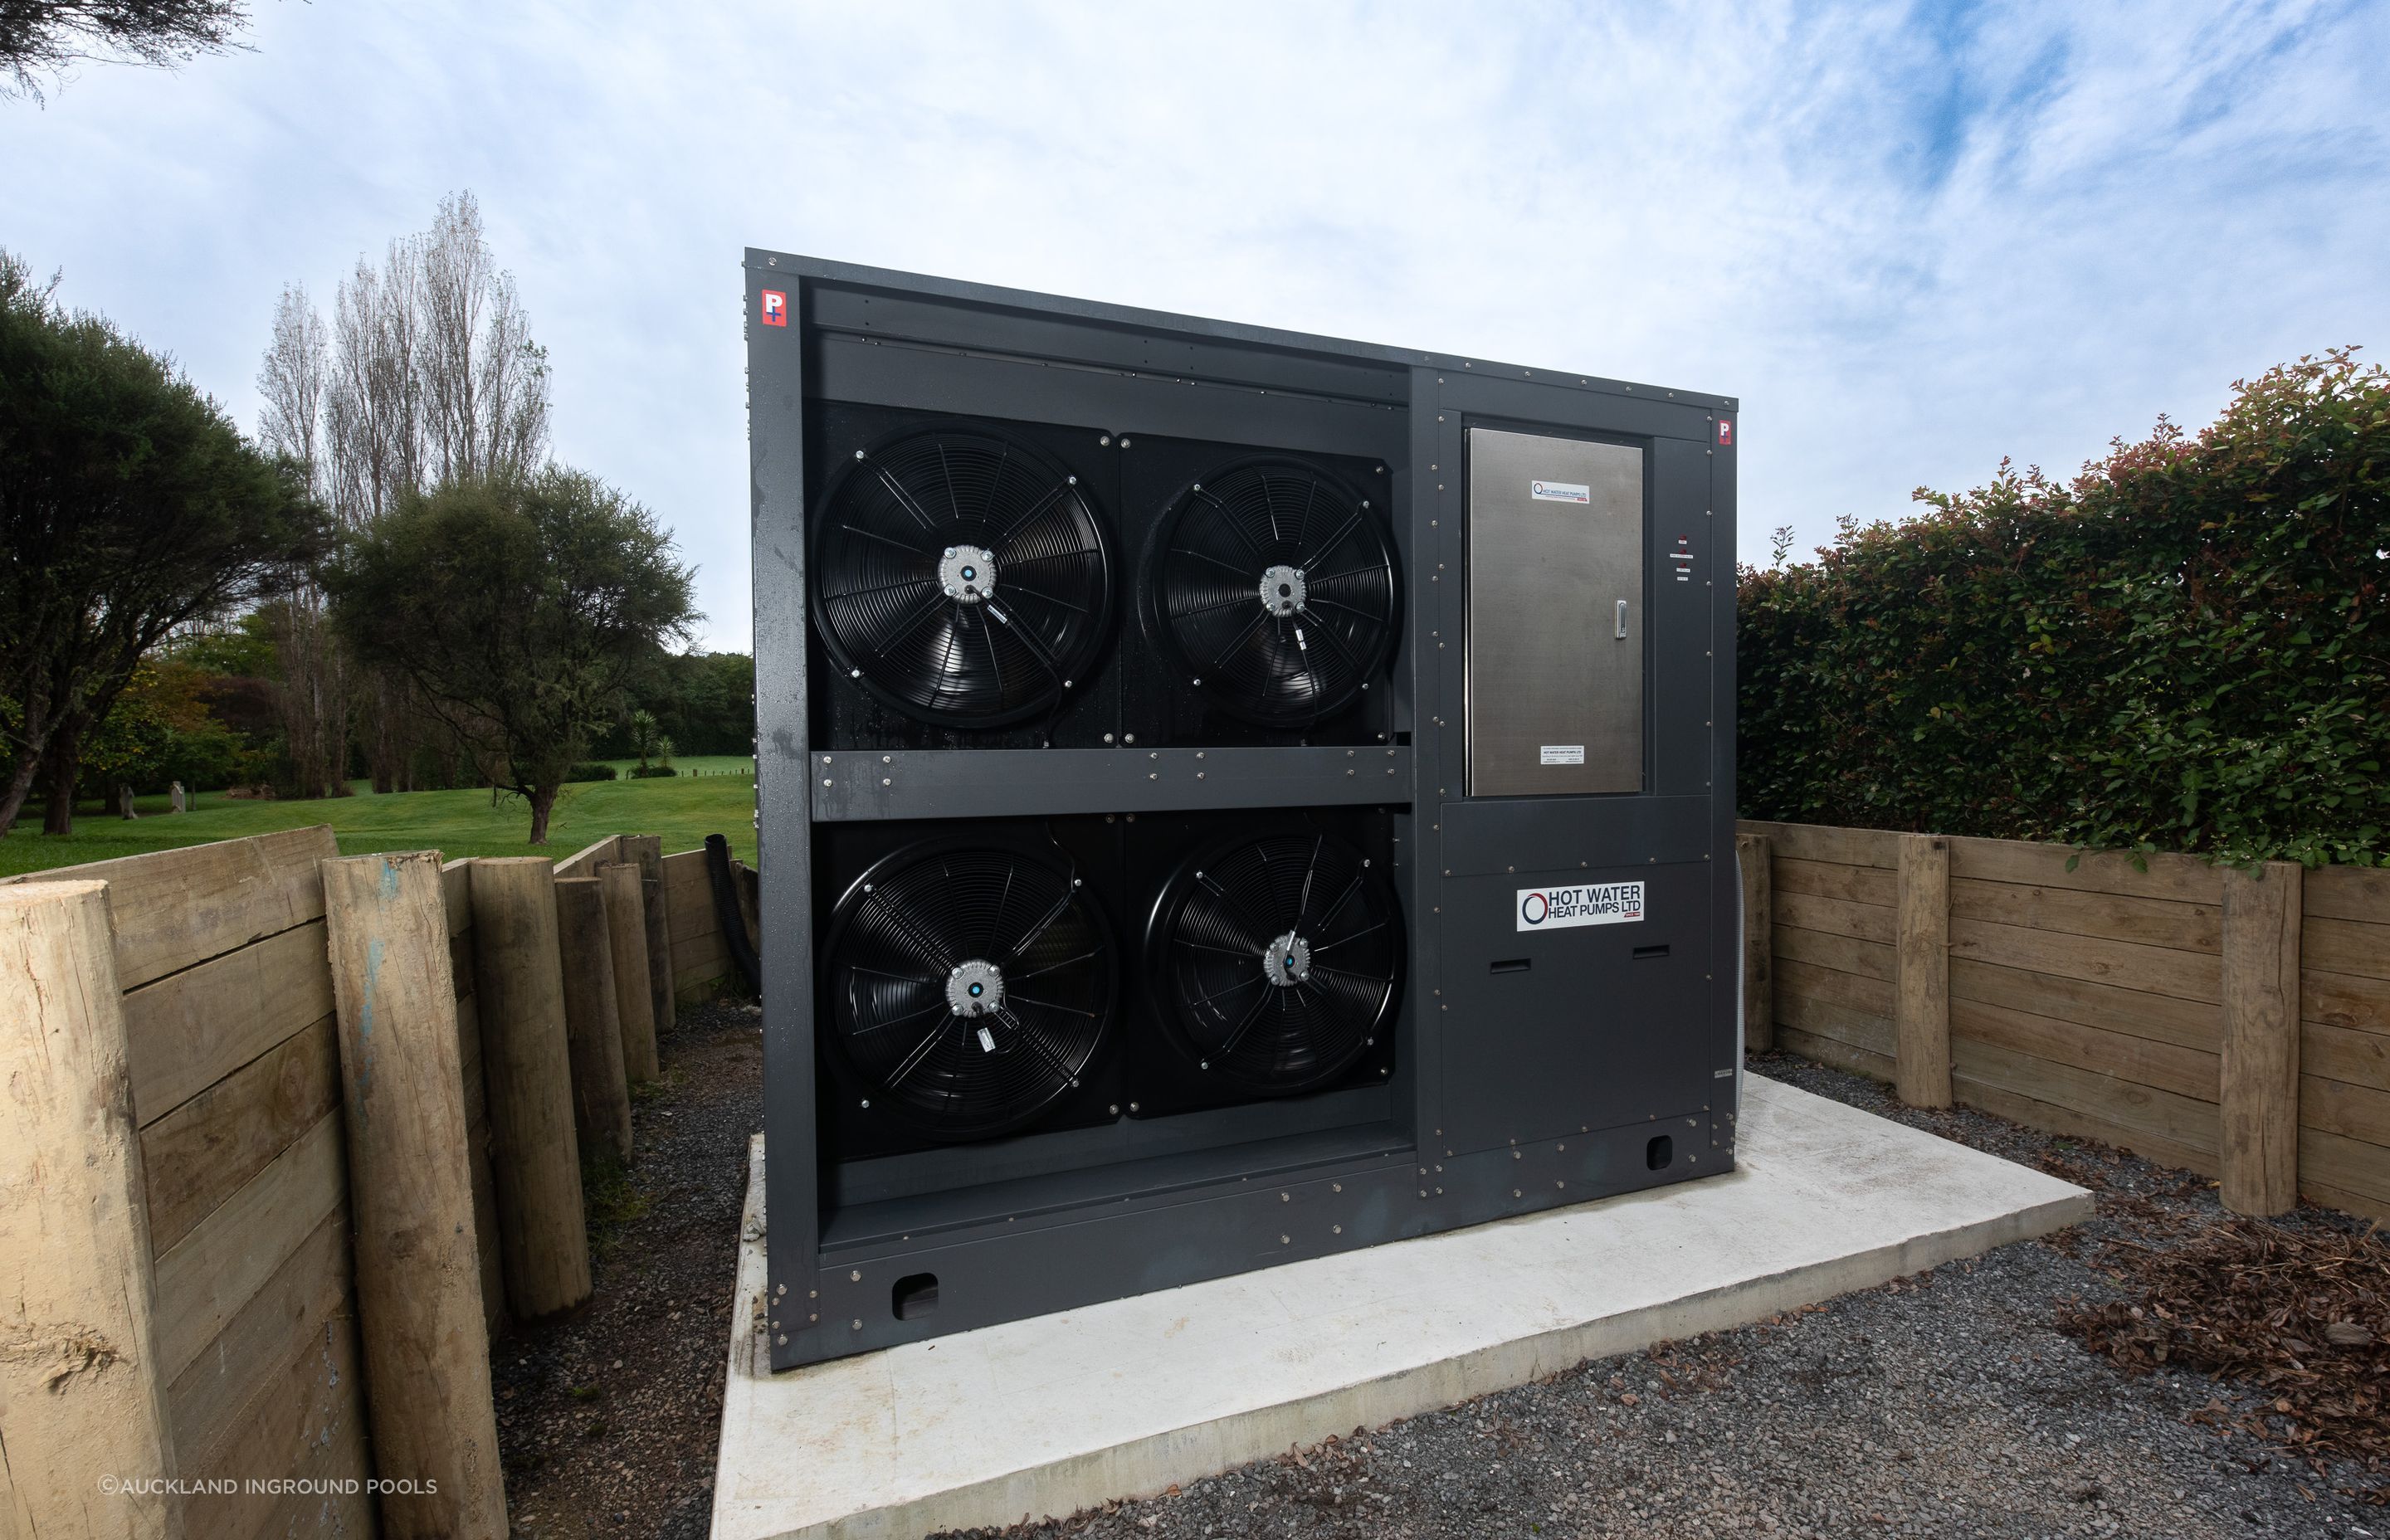 Hot Water Heat Pumps custom built this 140kw Heat Pump to easily heat the large volume of water year round